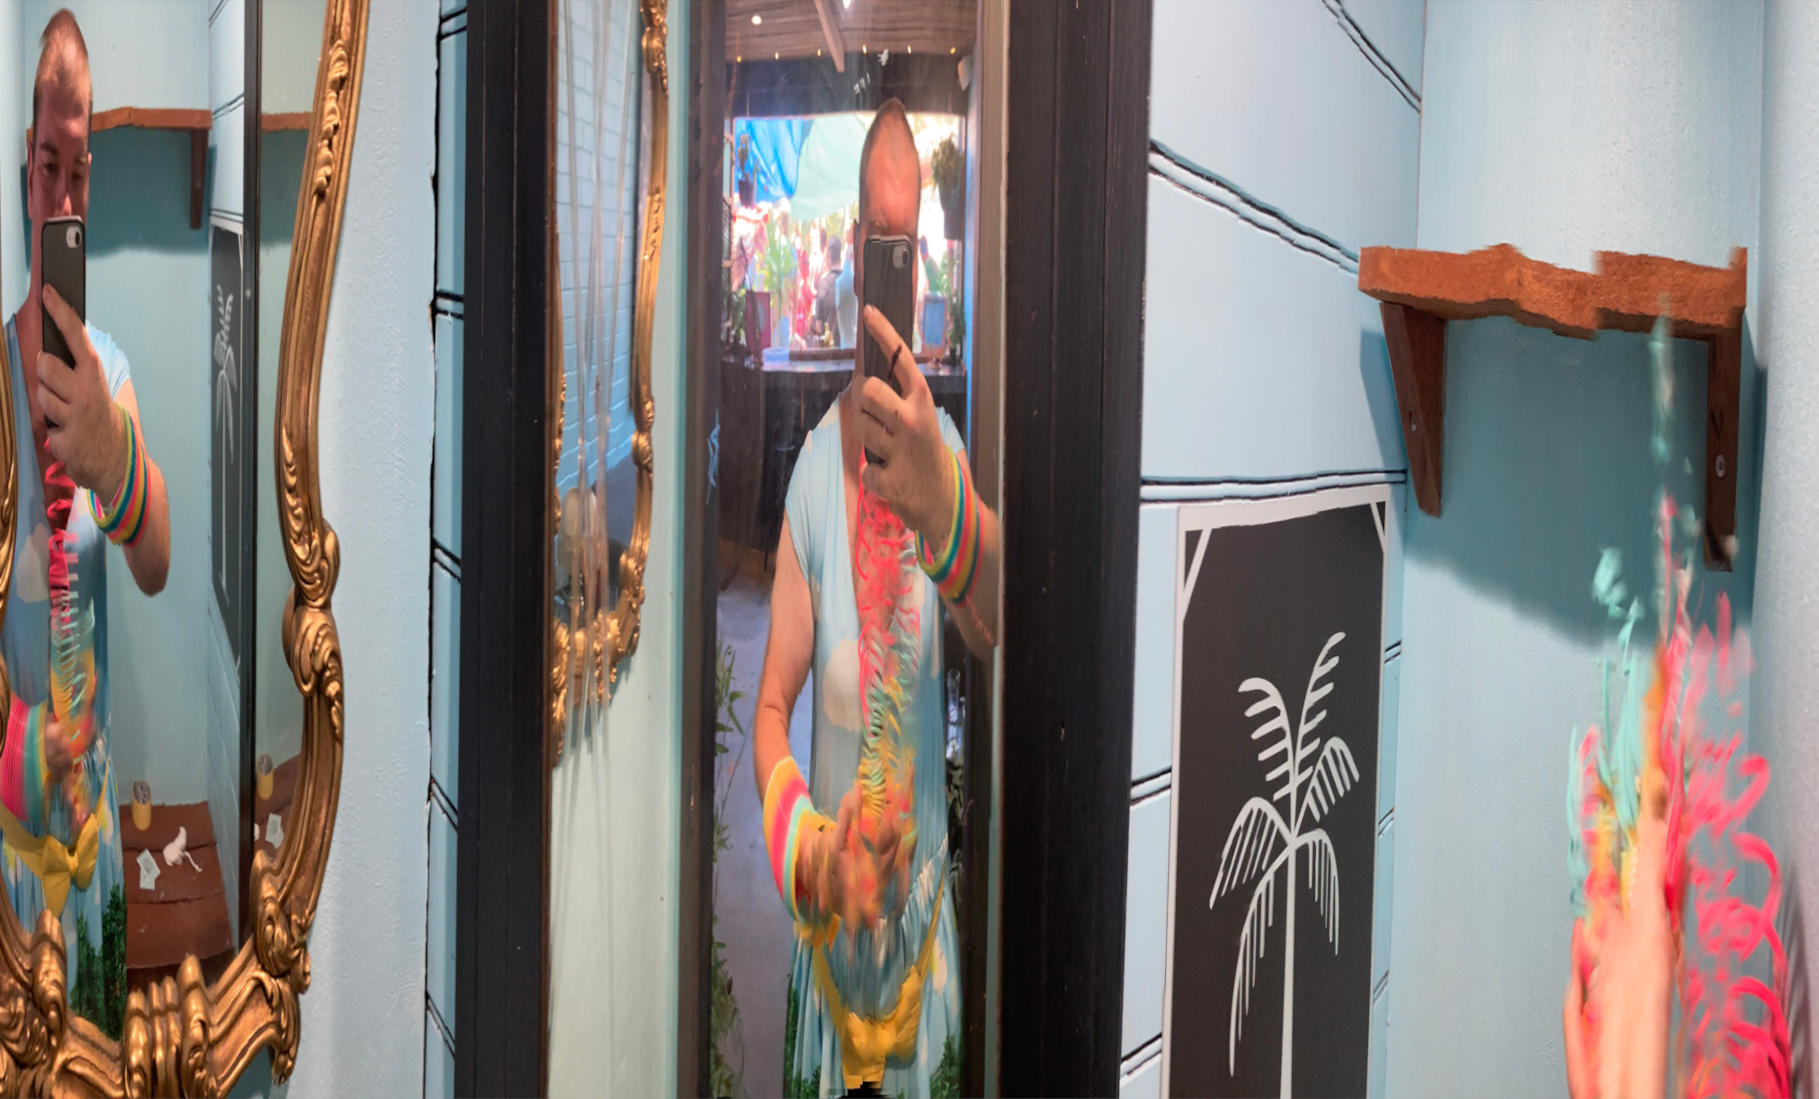 Slinkyfam panorama. Wearing vintage flamingo dress. 3 mirrors reflecting each other. 